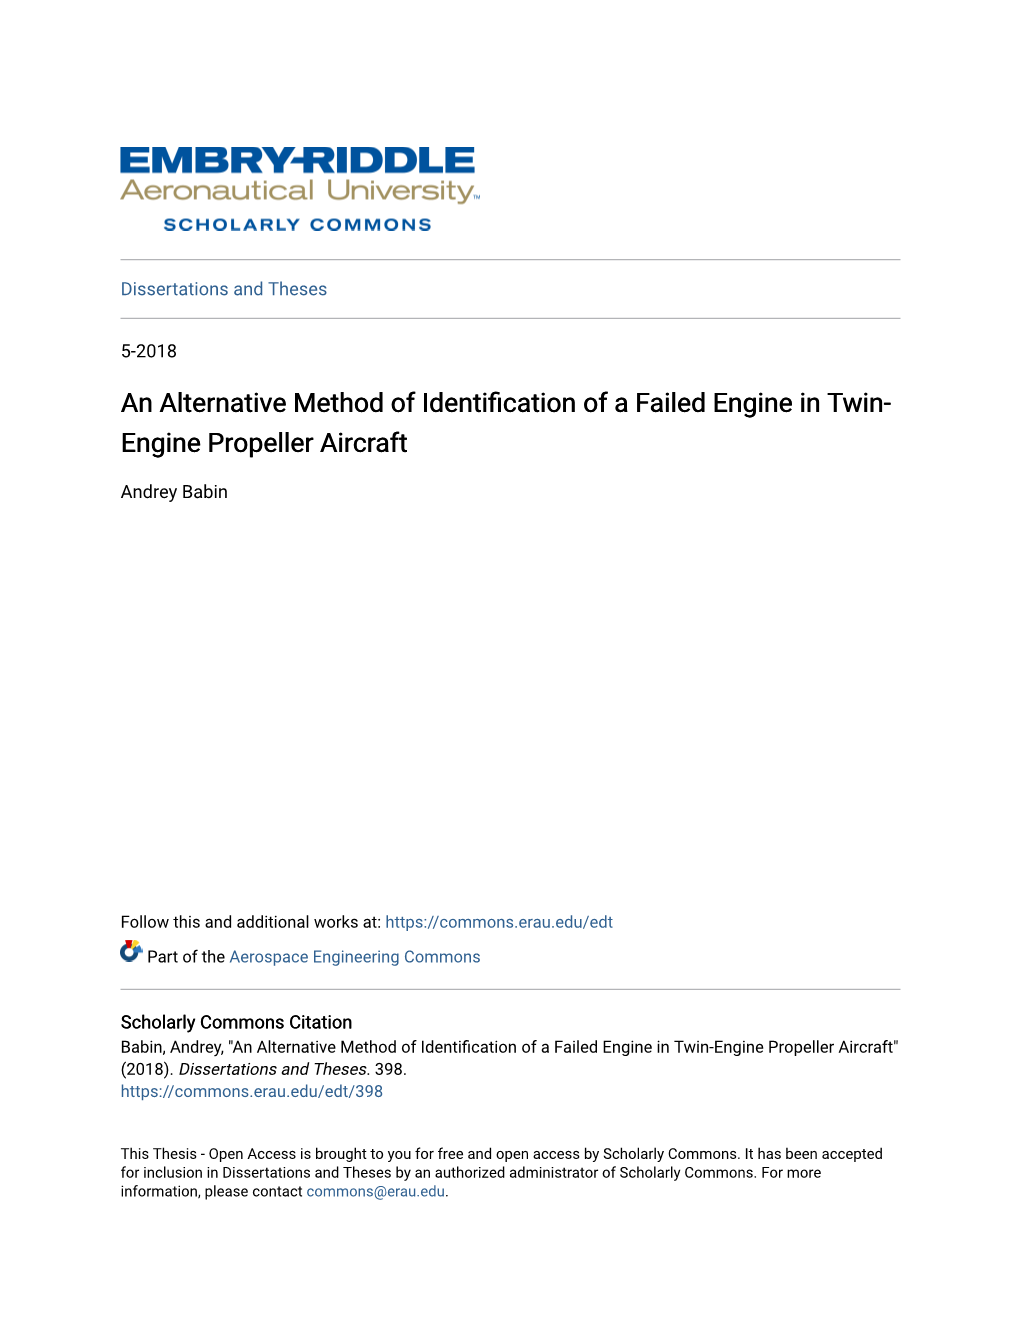 An Alternative Method of Identification of a Failed Engine in Twin-Engine Propeller Aircraft